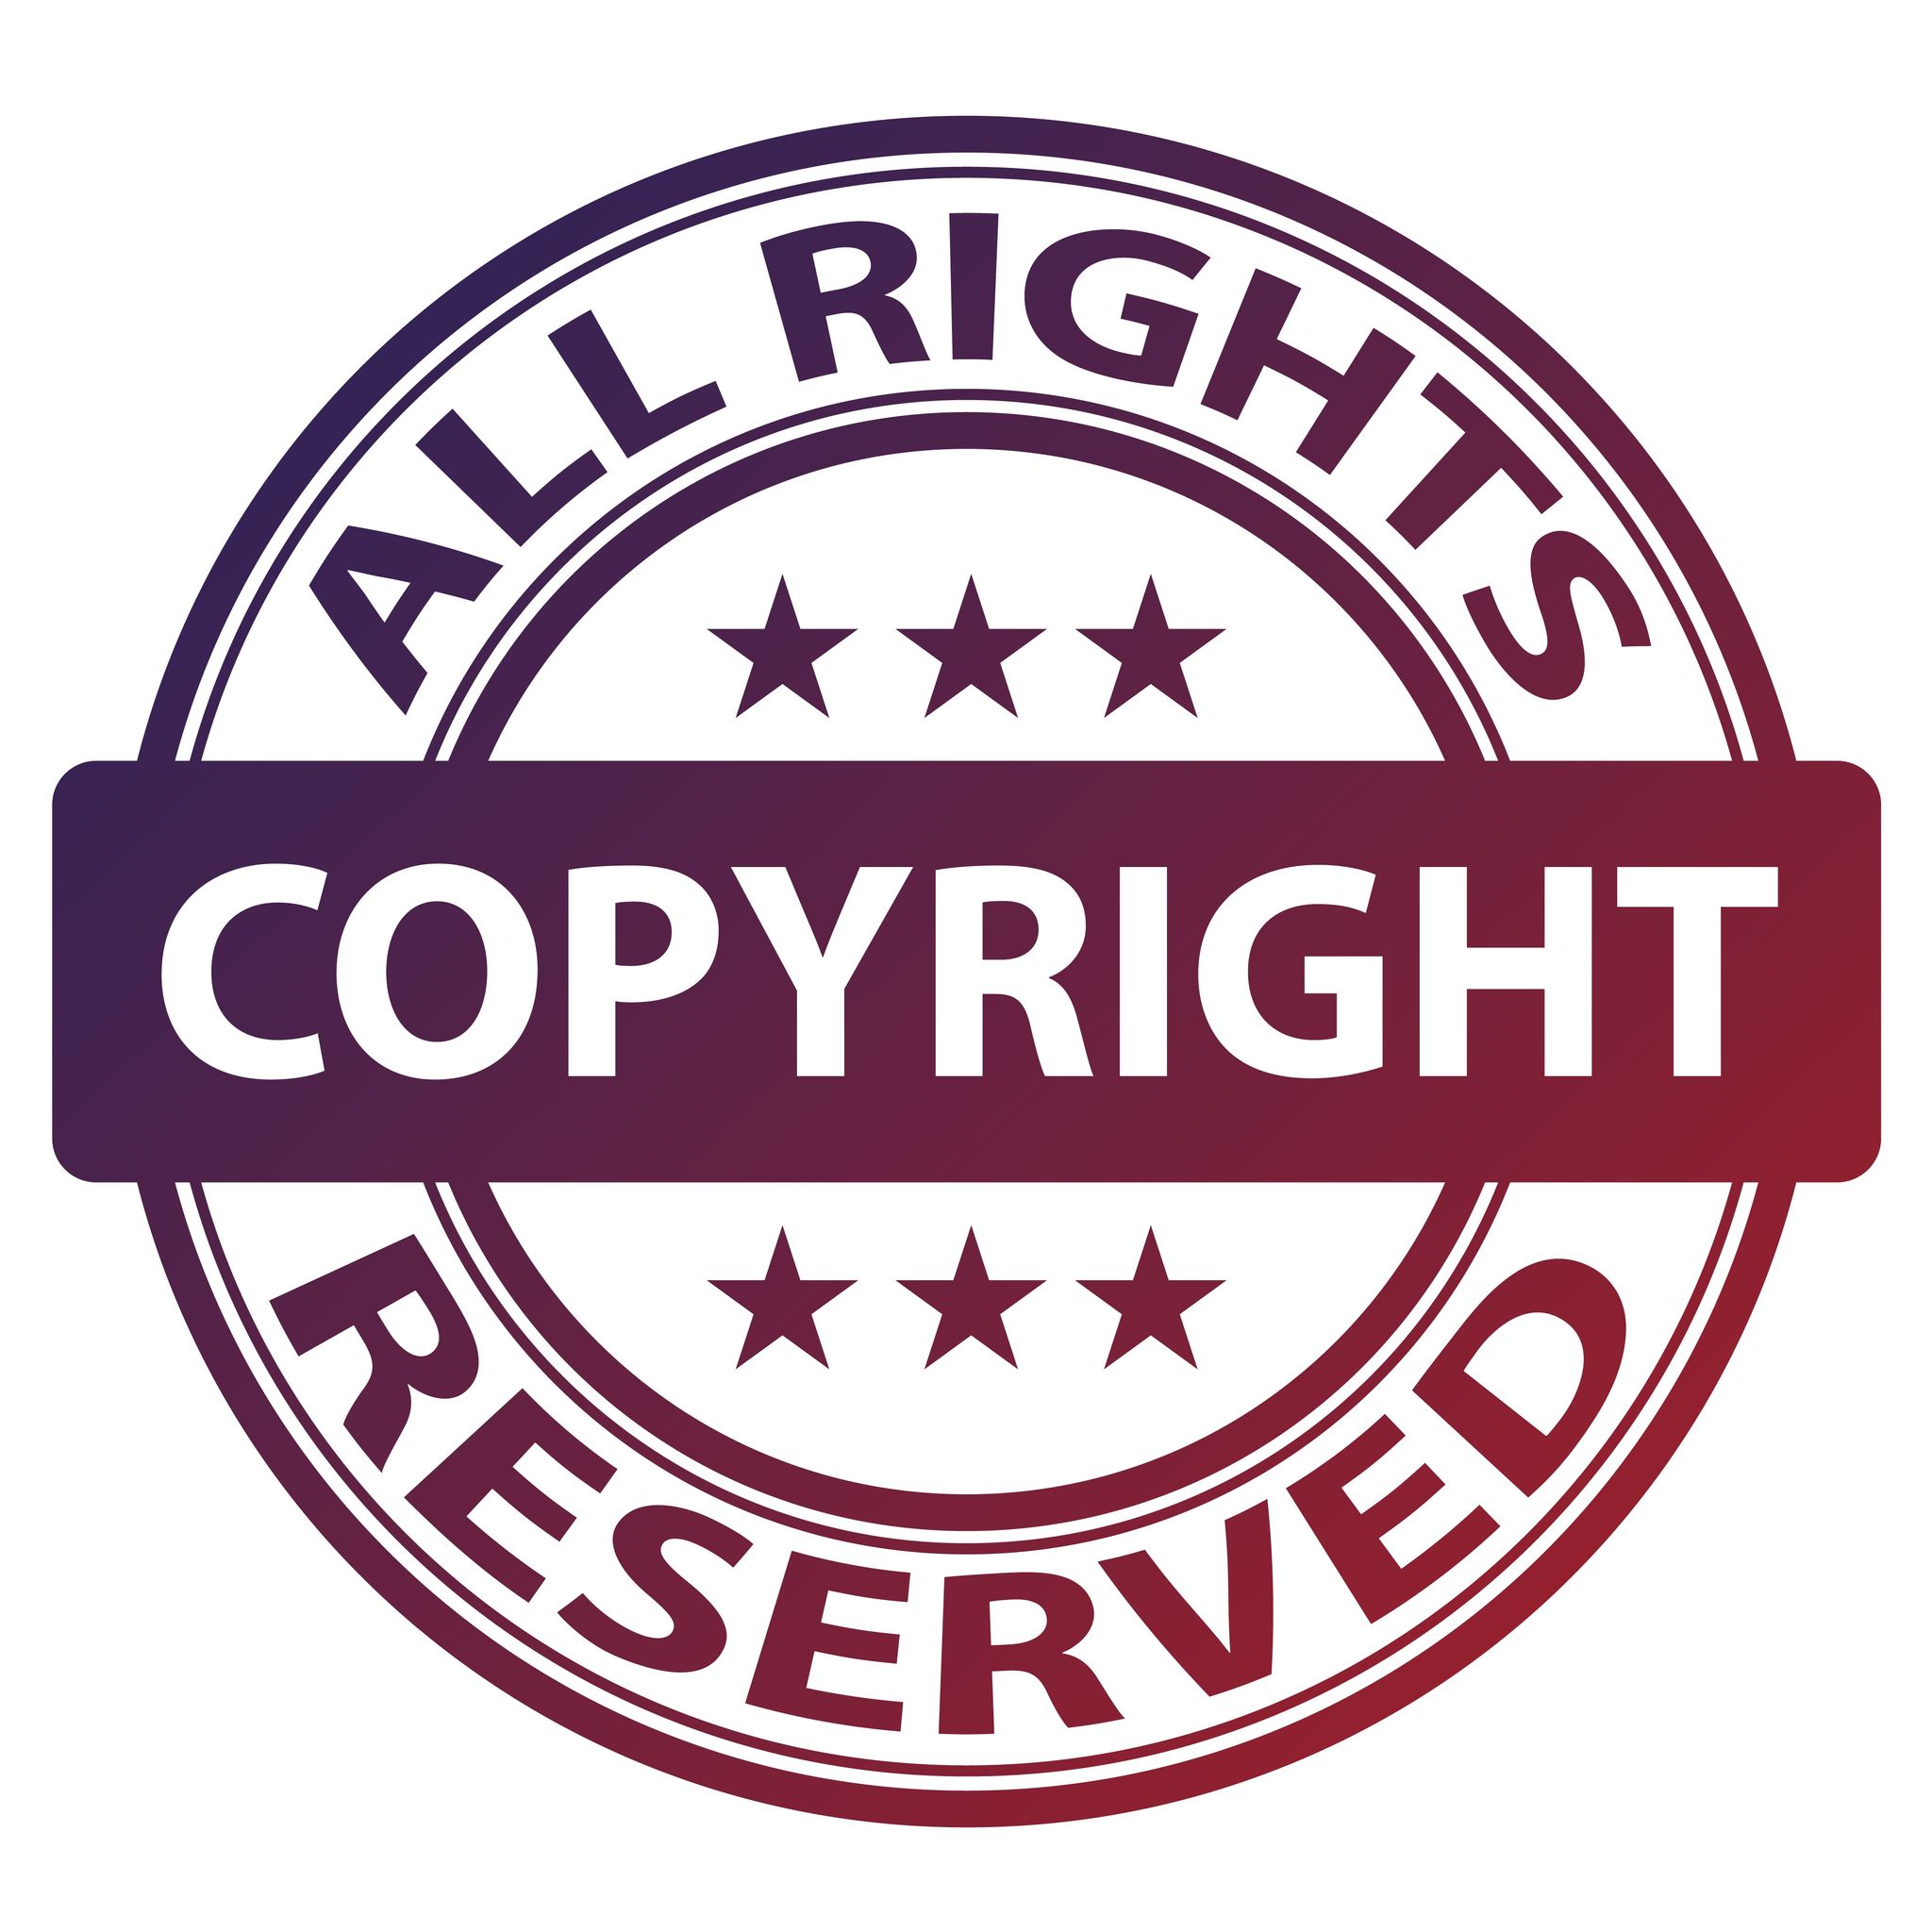 Website Copyrighting - Necessity or Formality?